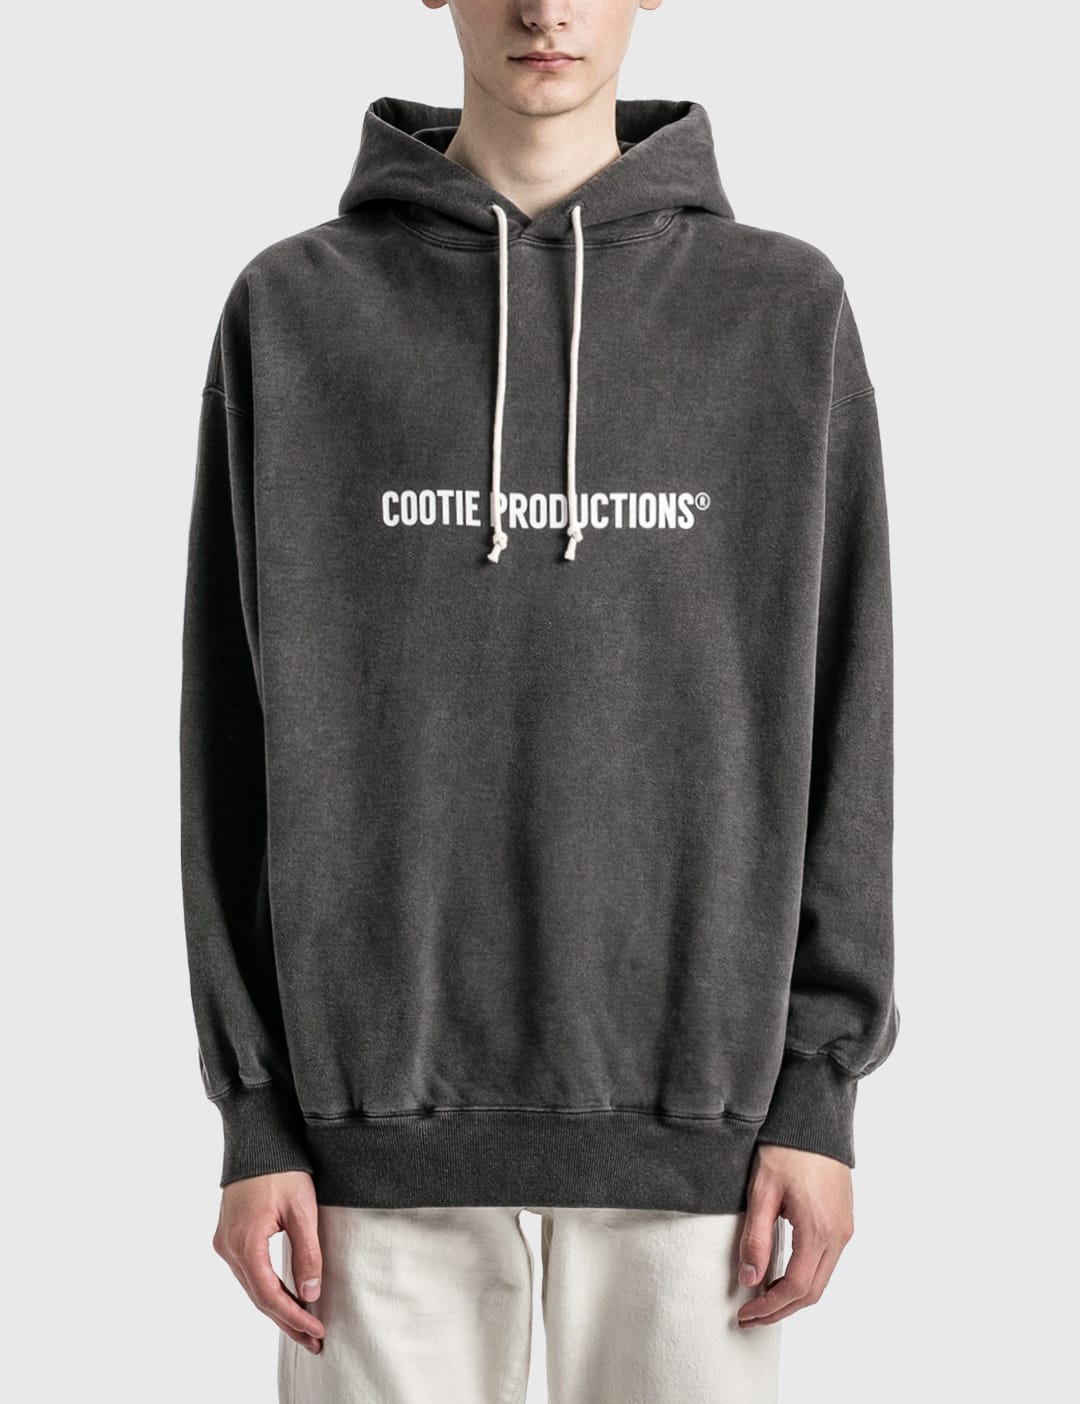 Cootie Productions - Pigment Dyed Sweat Hoodie | HBX - Globally